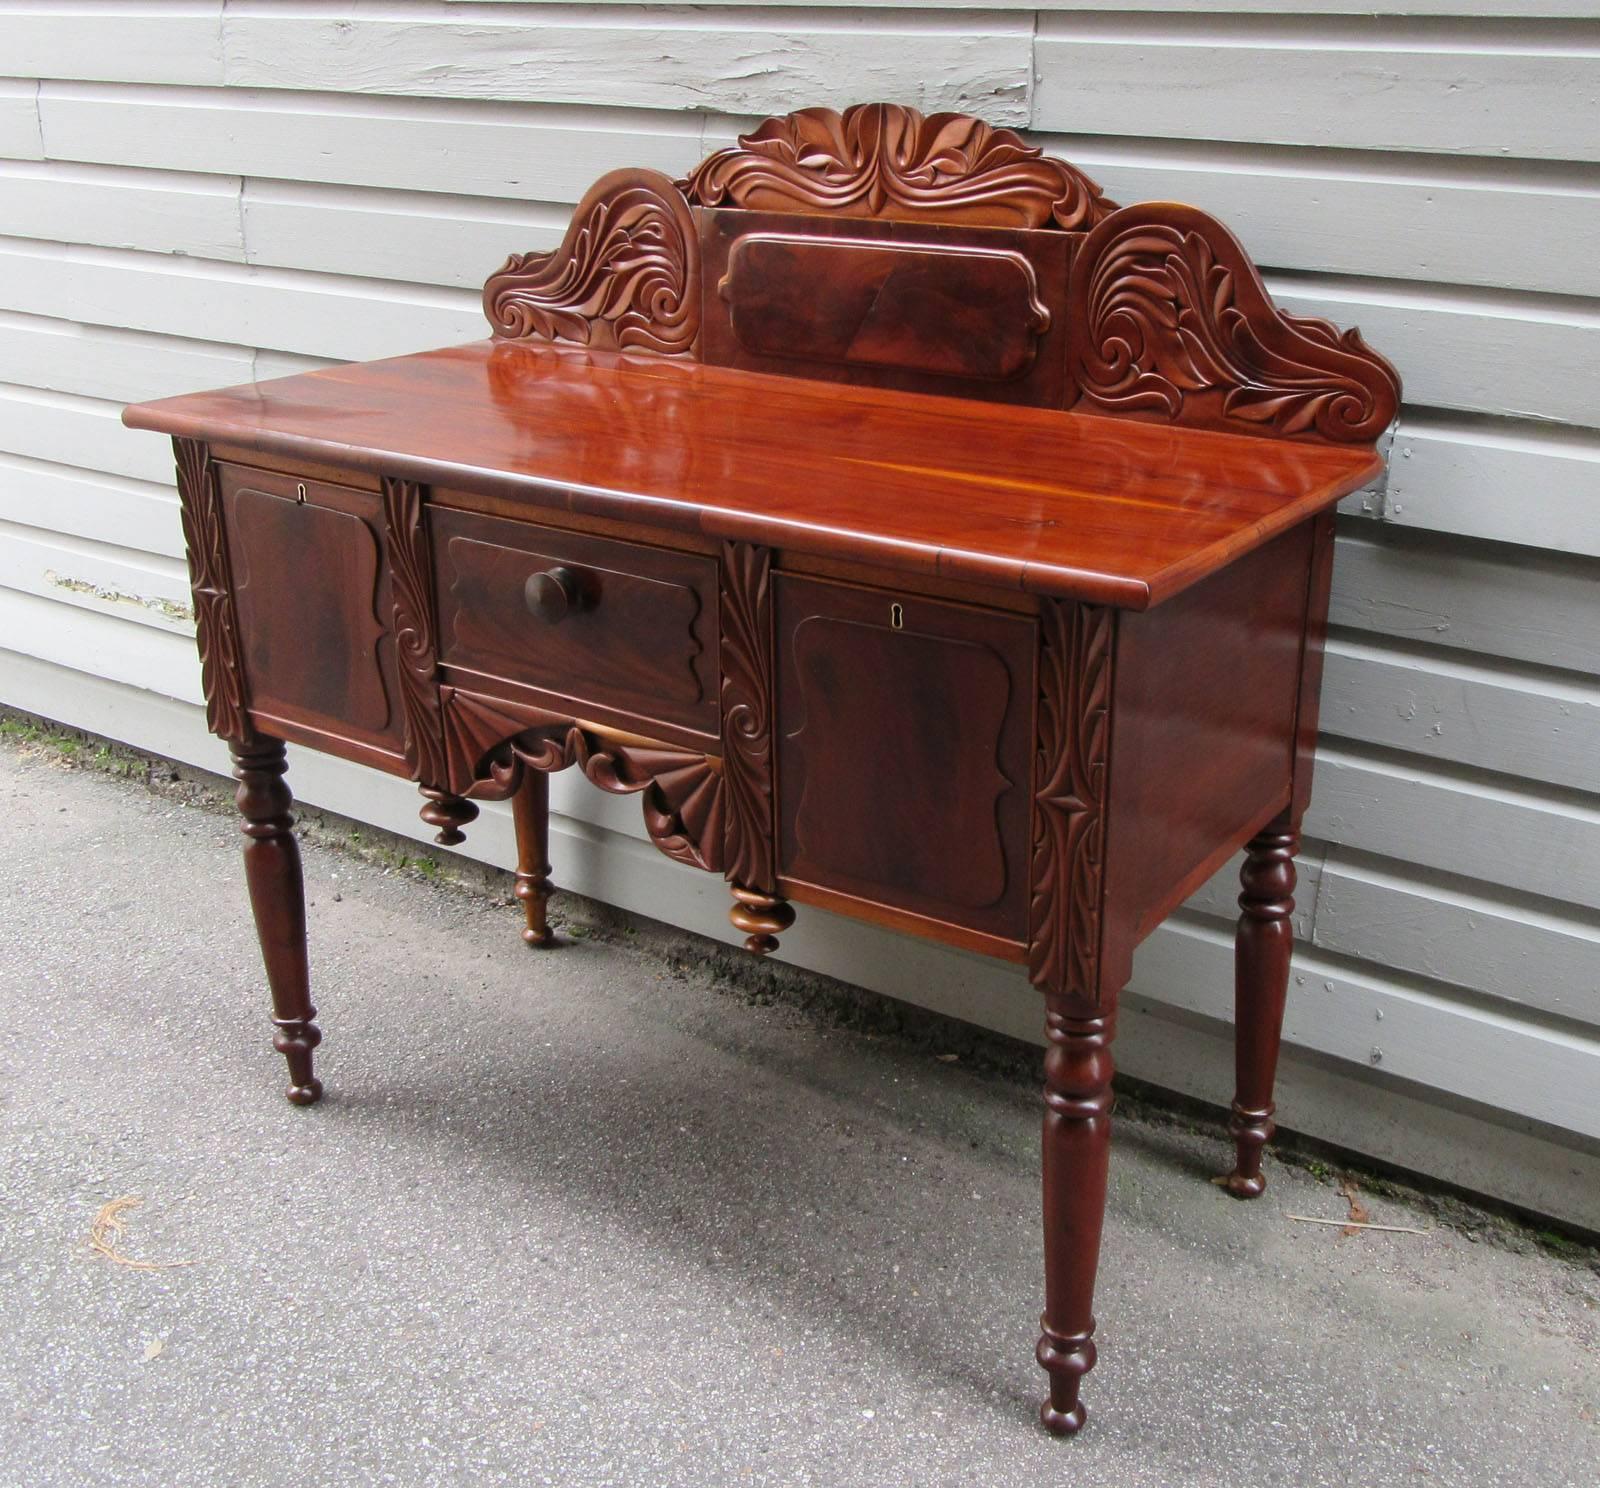 A fine West Indies Regency style cupping table from Barbados made of mahogany and cedrela, circa 1830, featuring exquisite carvings of local flora and fauna and three storage drawers. The drawers on either side of the table lock and the serving